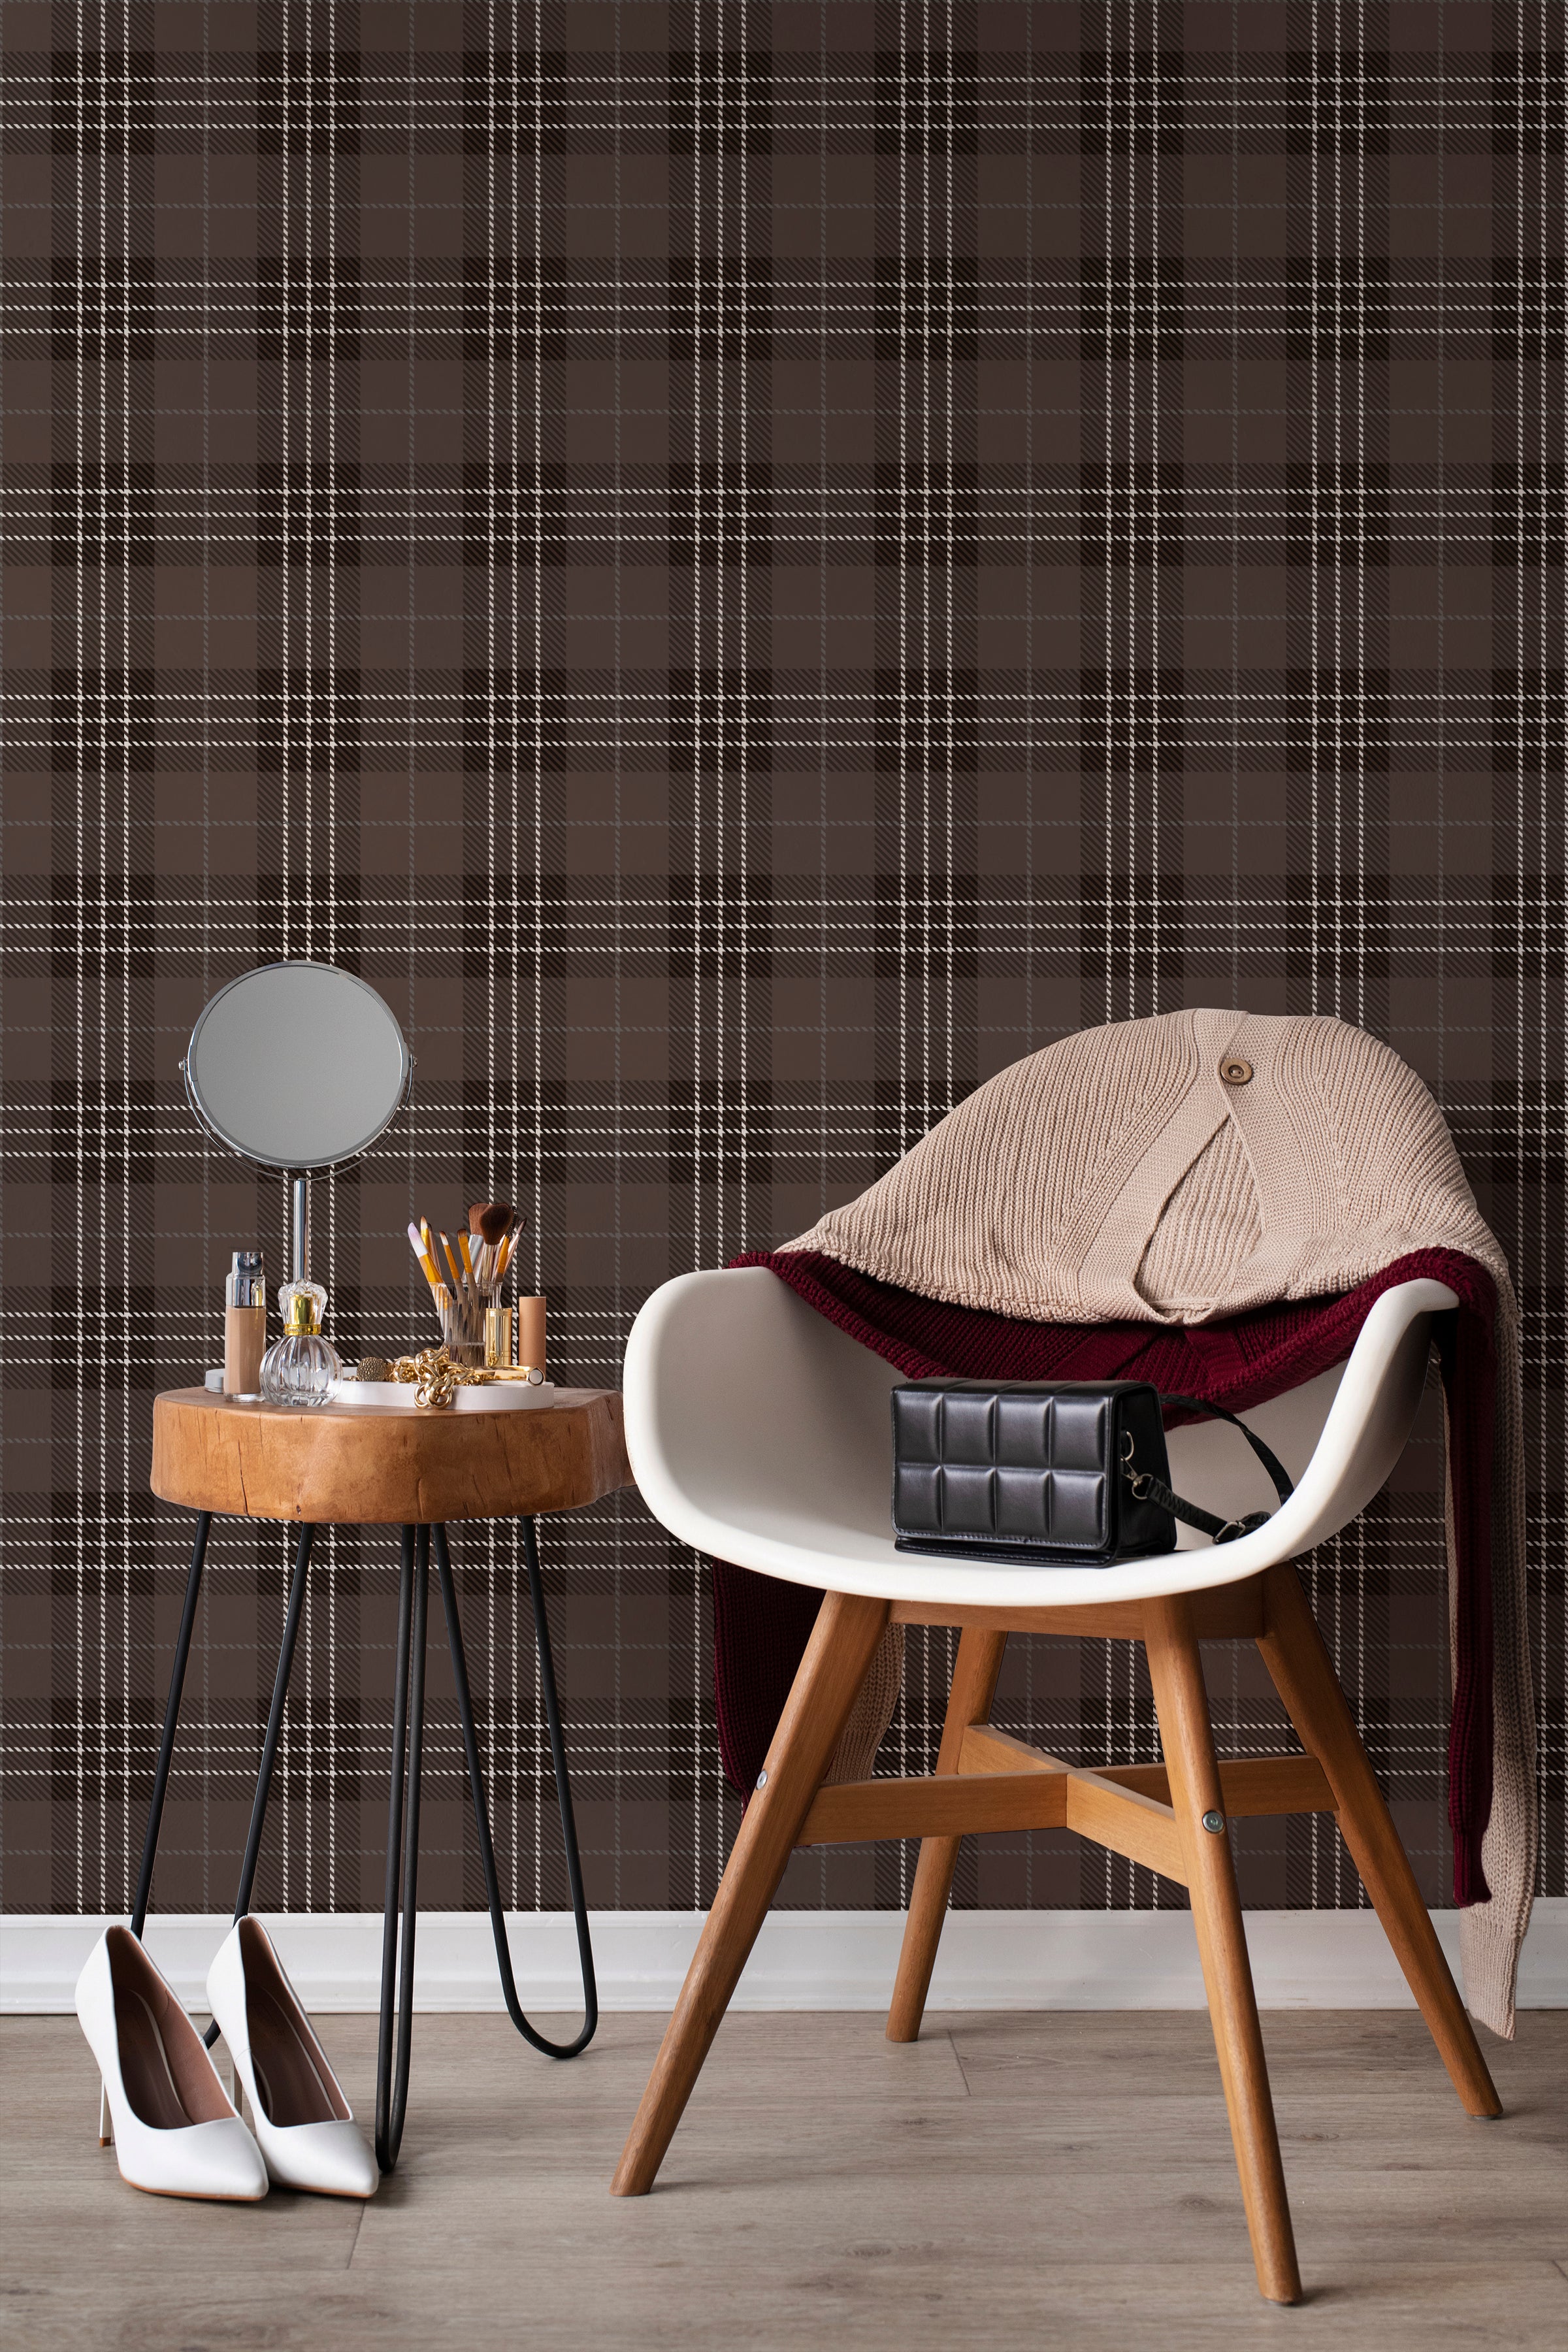 An elegant interior setting where Dark Plaid Wallpaper - Black serves as a backdrop, exuding a classic, sophisticated charm. The scene includes a stylish mid-century modern chair draped with a knit sweater and a purse, a side table with personal items and a round mirror, creating a personal vanity space.